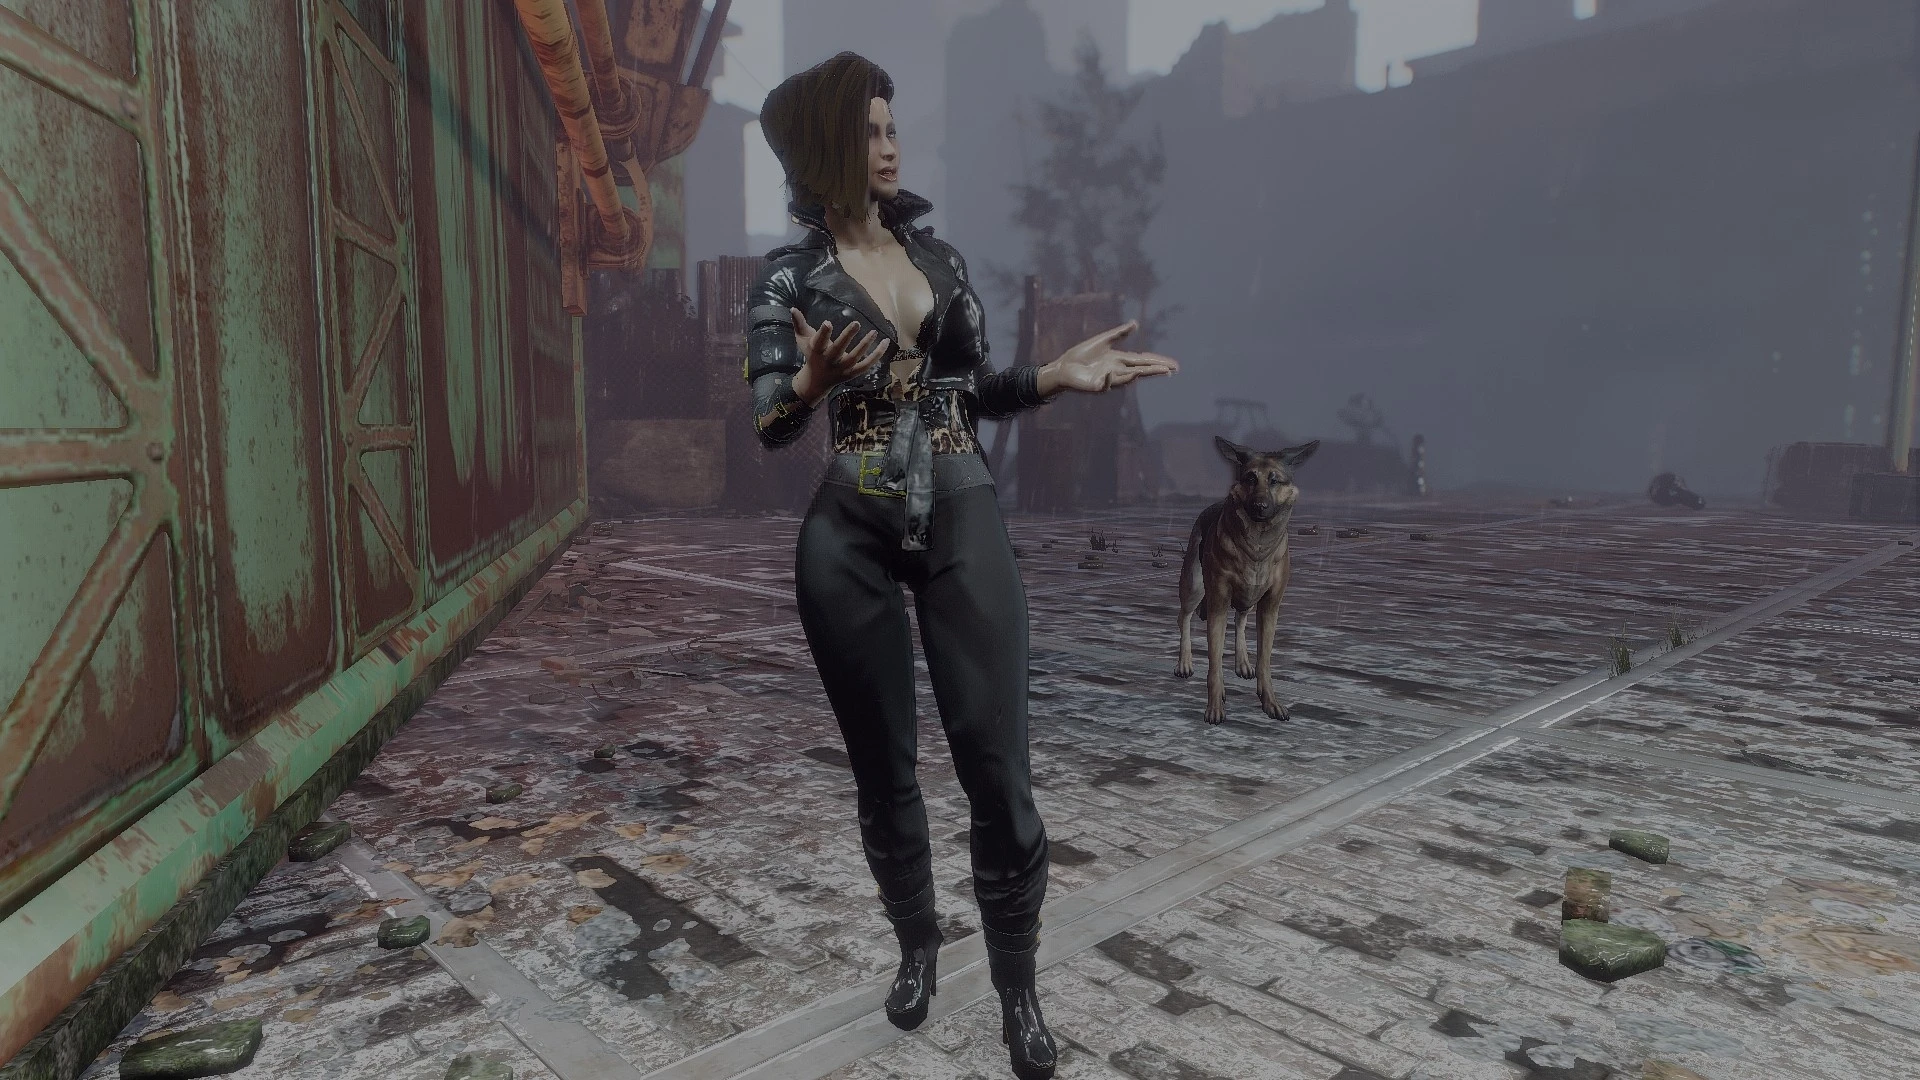 Insignificant object remover на fallout 4 фото 90